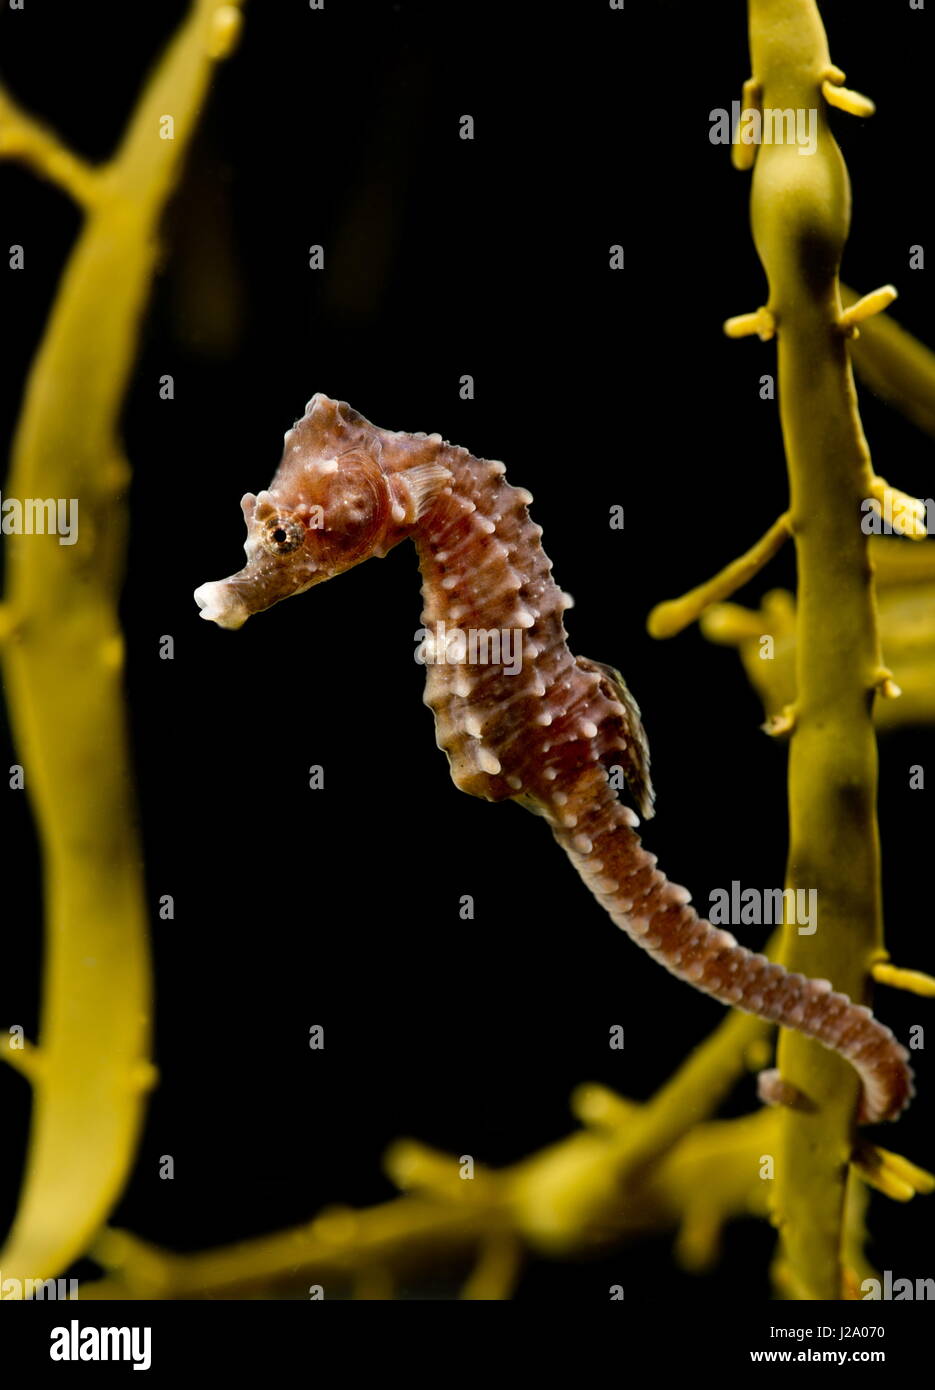 The short-snouted seahorse, Hippocampus hippocampus, is a species of seahorse in the family Syngnathidae. It is endemic to the Mediterranean Sea and parts of the North Atlantic, particularly around Italy and the Canary Islands. Colonies of the species have recently been discovered in the River Thames around London and Southend-on-Sea. Stock Photo